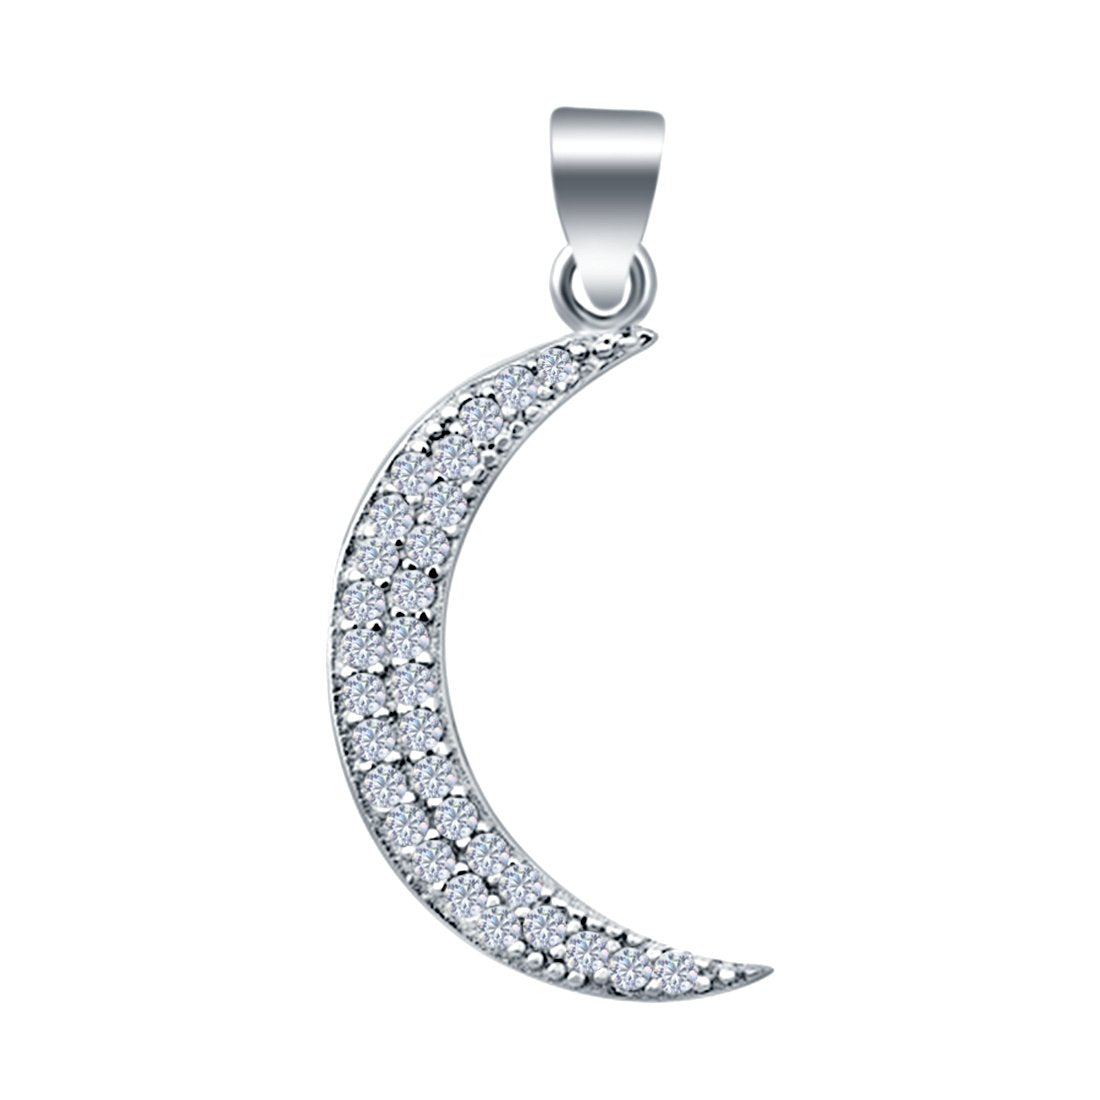 Crescent Moon Charm Pendant Simulated Cubic Zirconia 925 Sterling Silver (20mm)